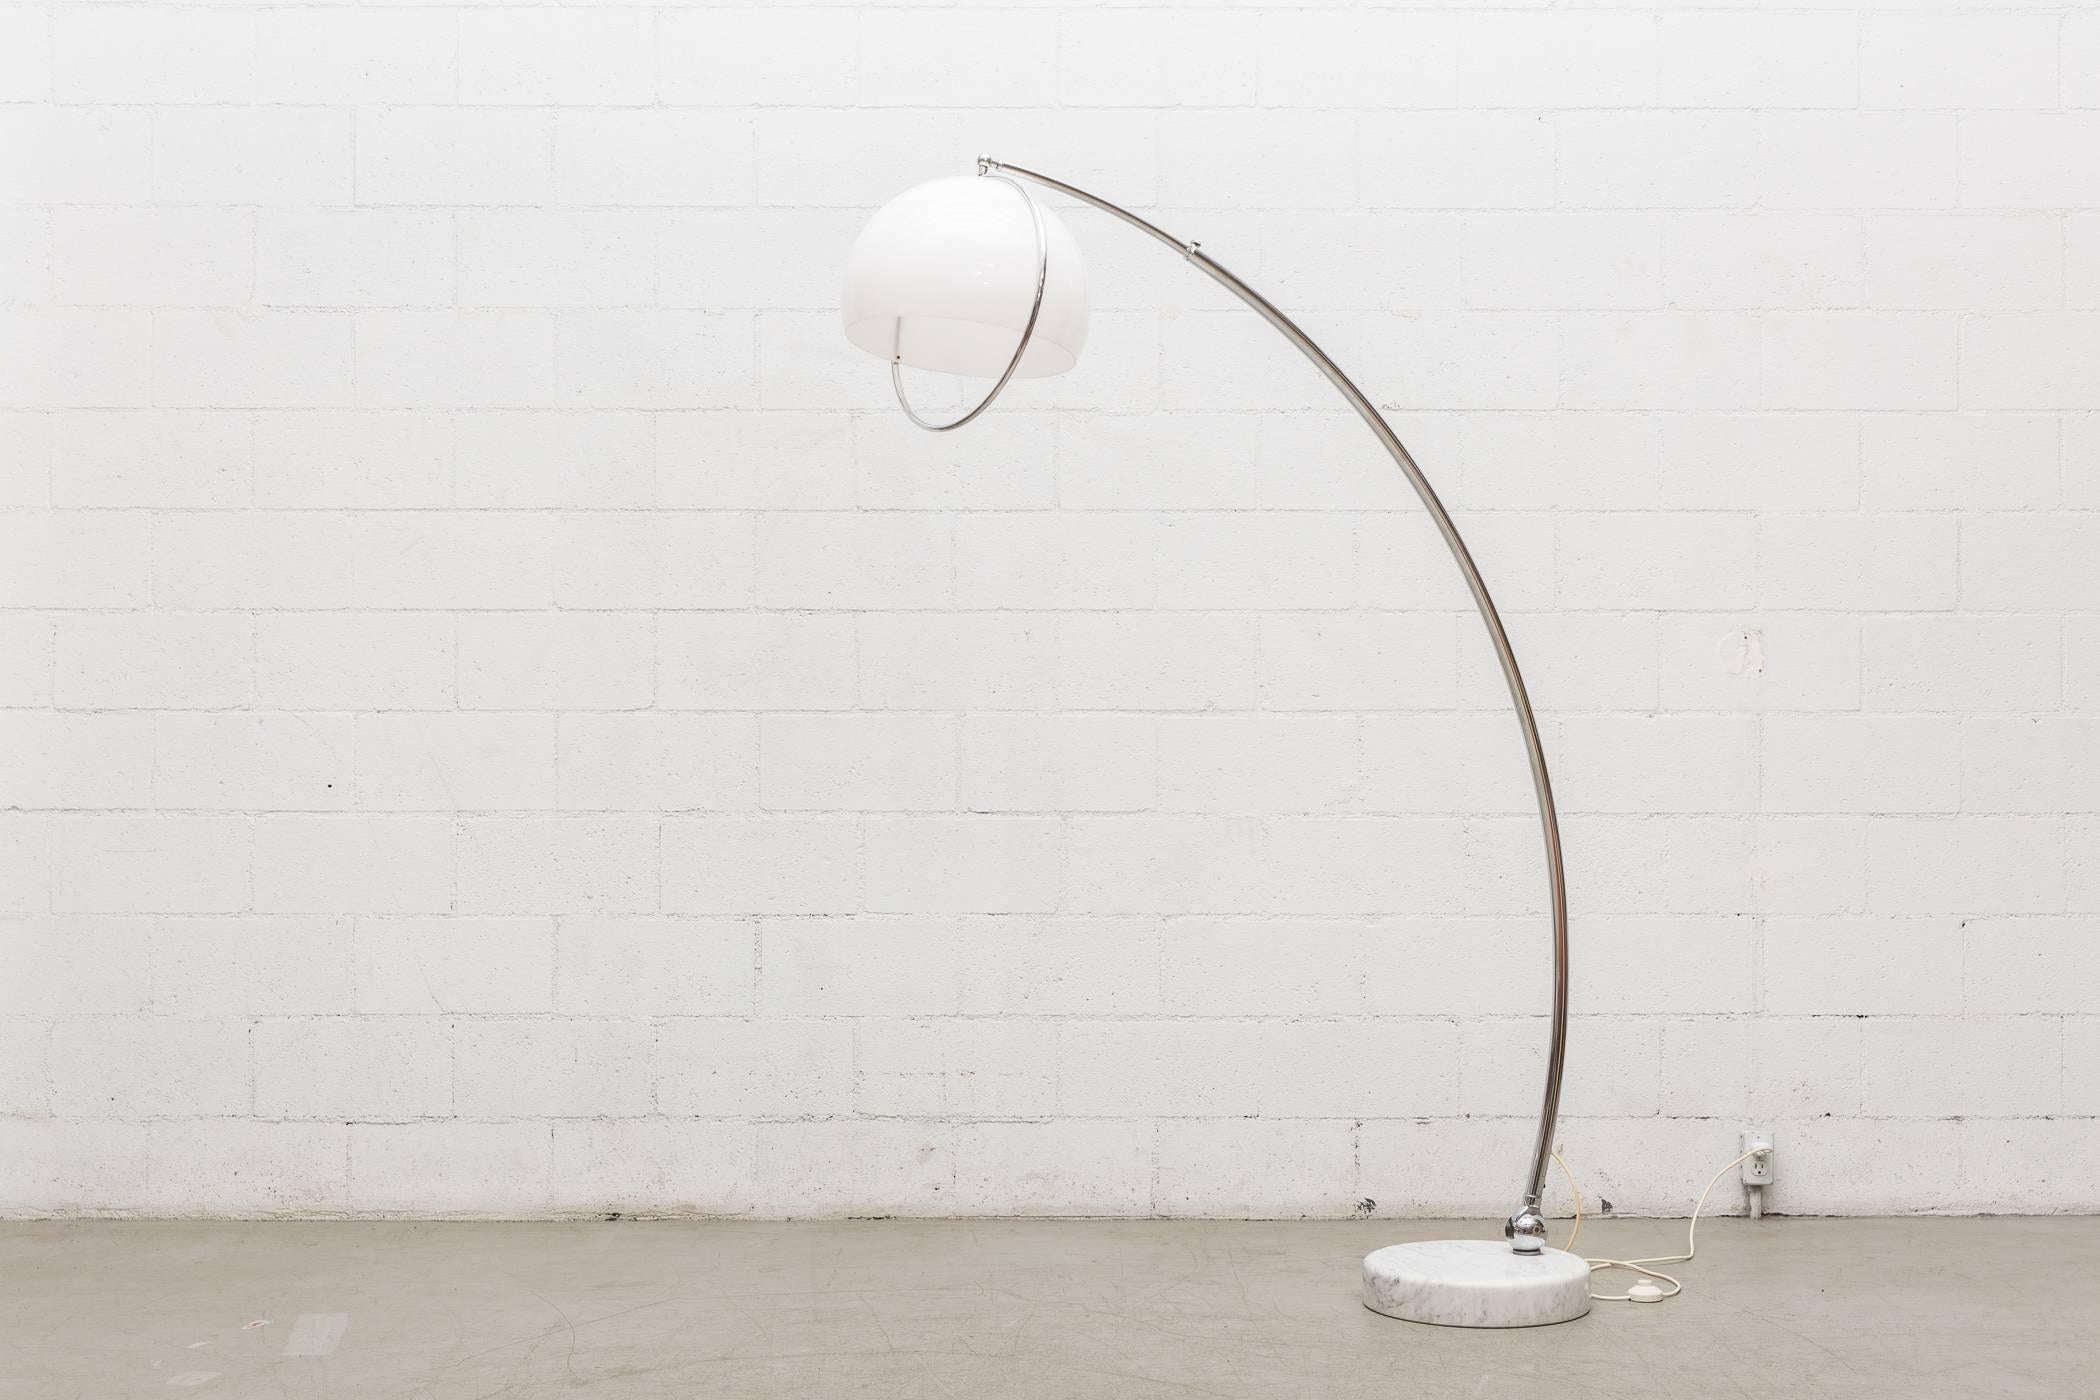 Large Arc lamp with heavy white marble base. Adjustable arc with chrome hardware and white plexiglass dome shade. Visible wear and tarnish to chrome. Marble in original condition. Two available.